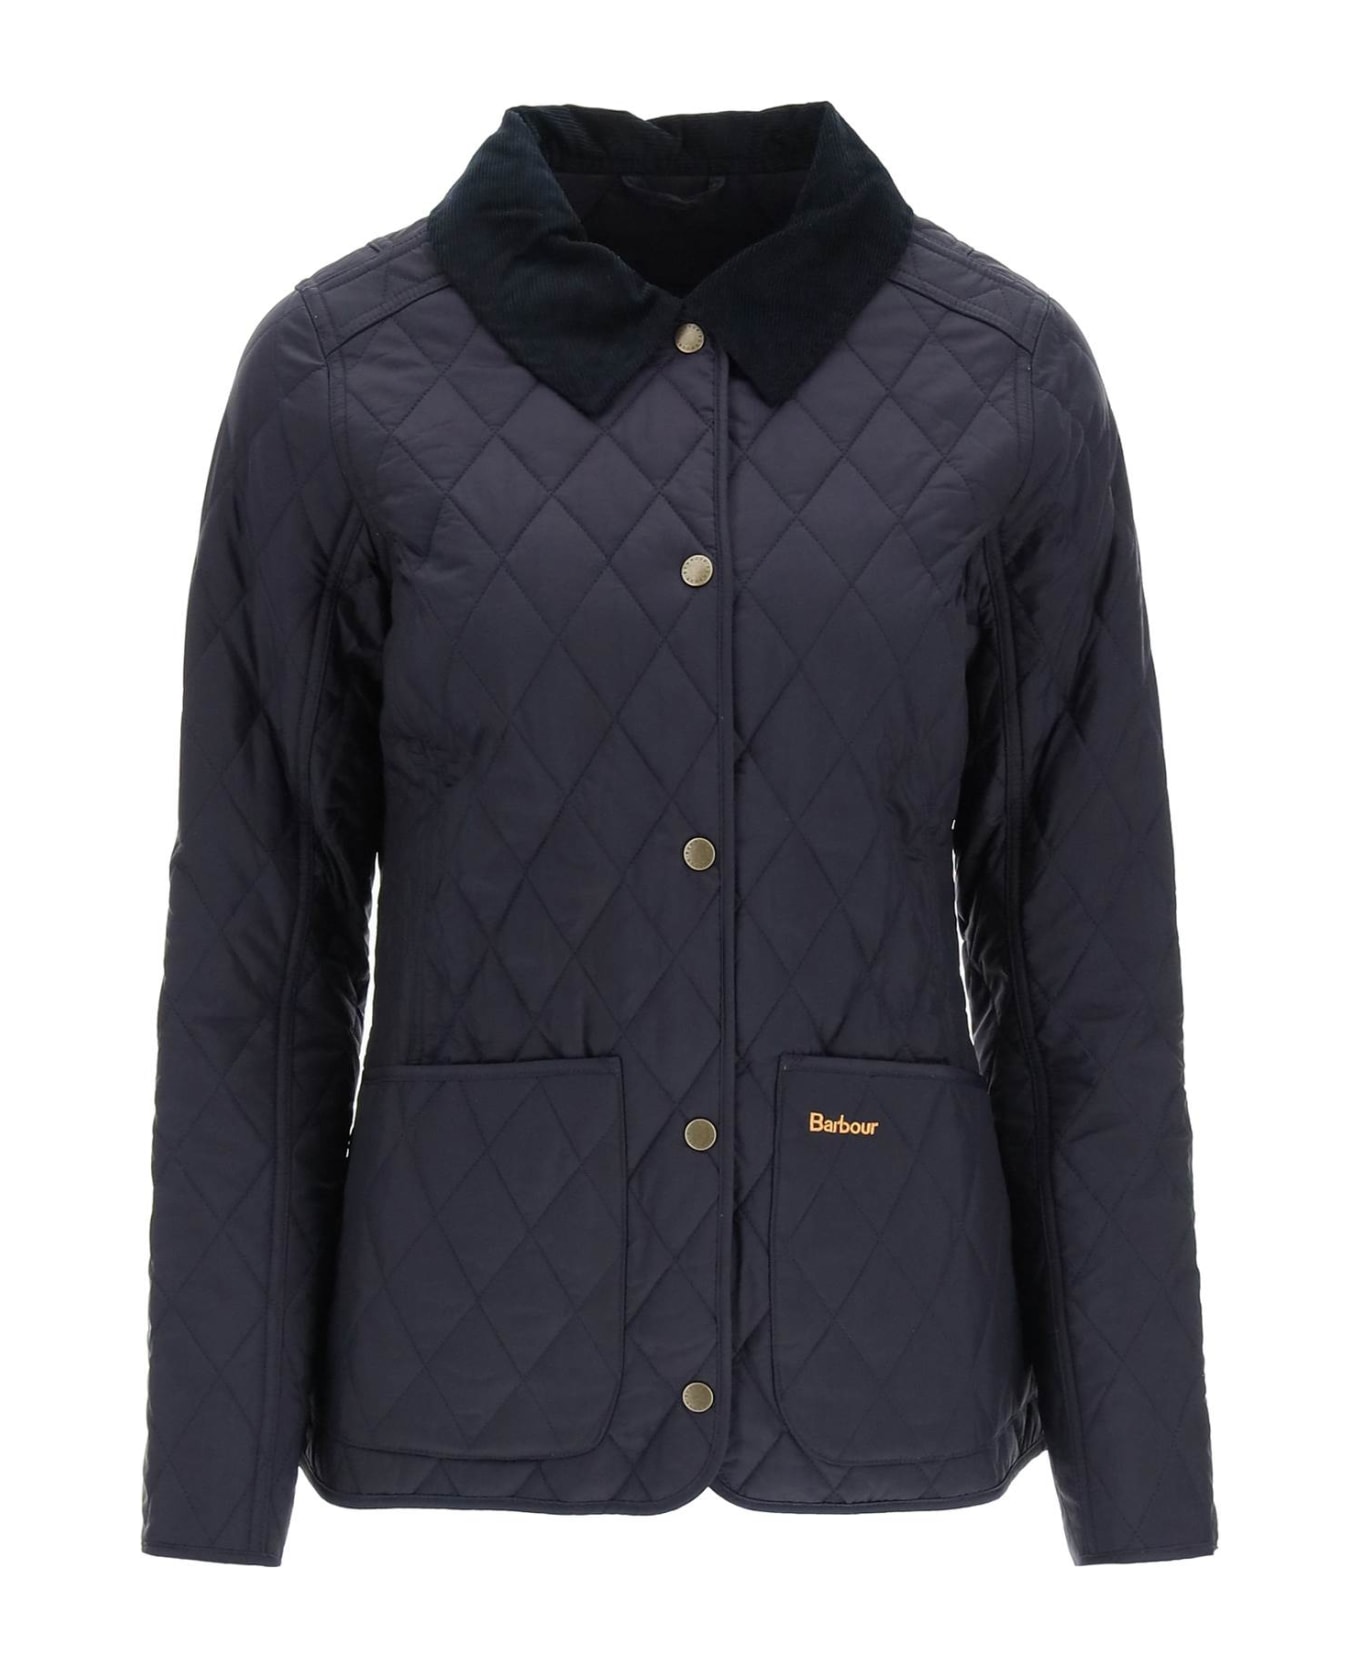 Barbour Annandale Diamond Quilted Jacket - NAVY (Blue) ジャケット